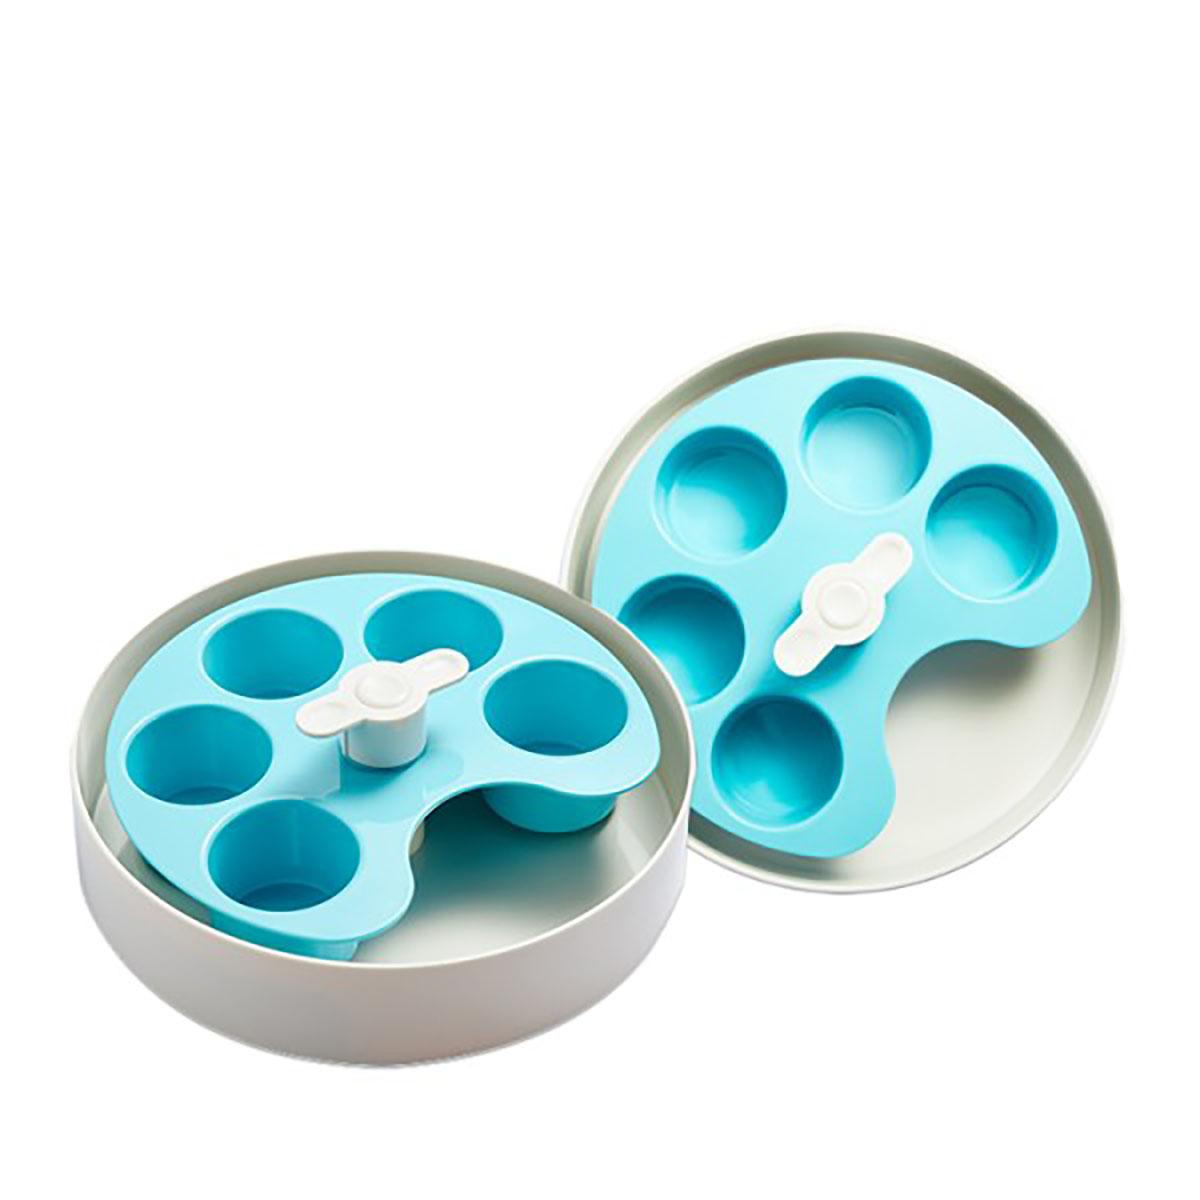 https://images.baxterboo.com/global/images/products/large/petdreamhouse-spin-interactive-slow-feeder-pet-bowl-palette-6383.jpg